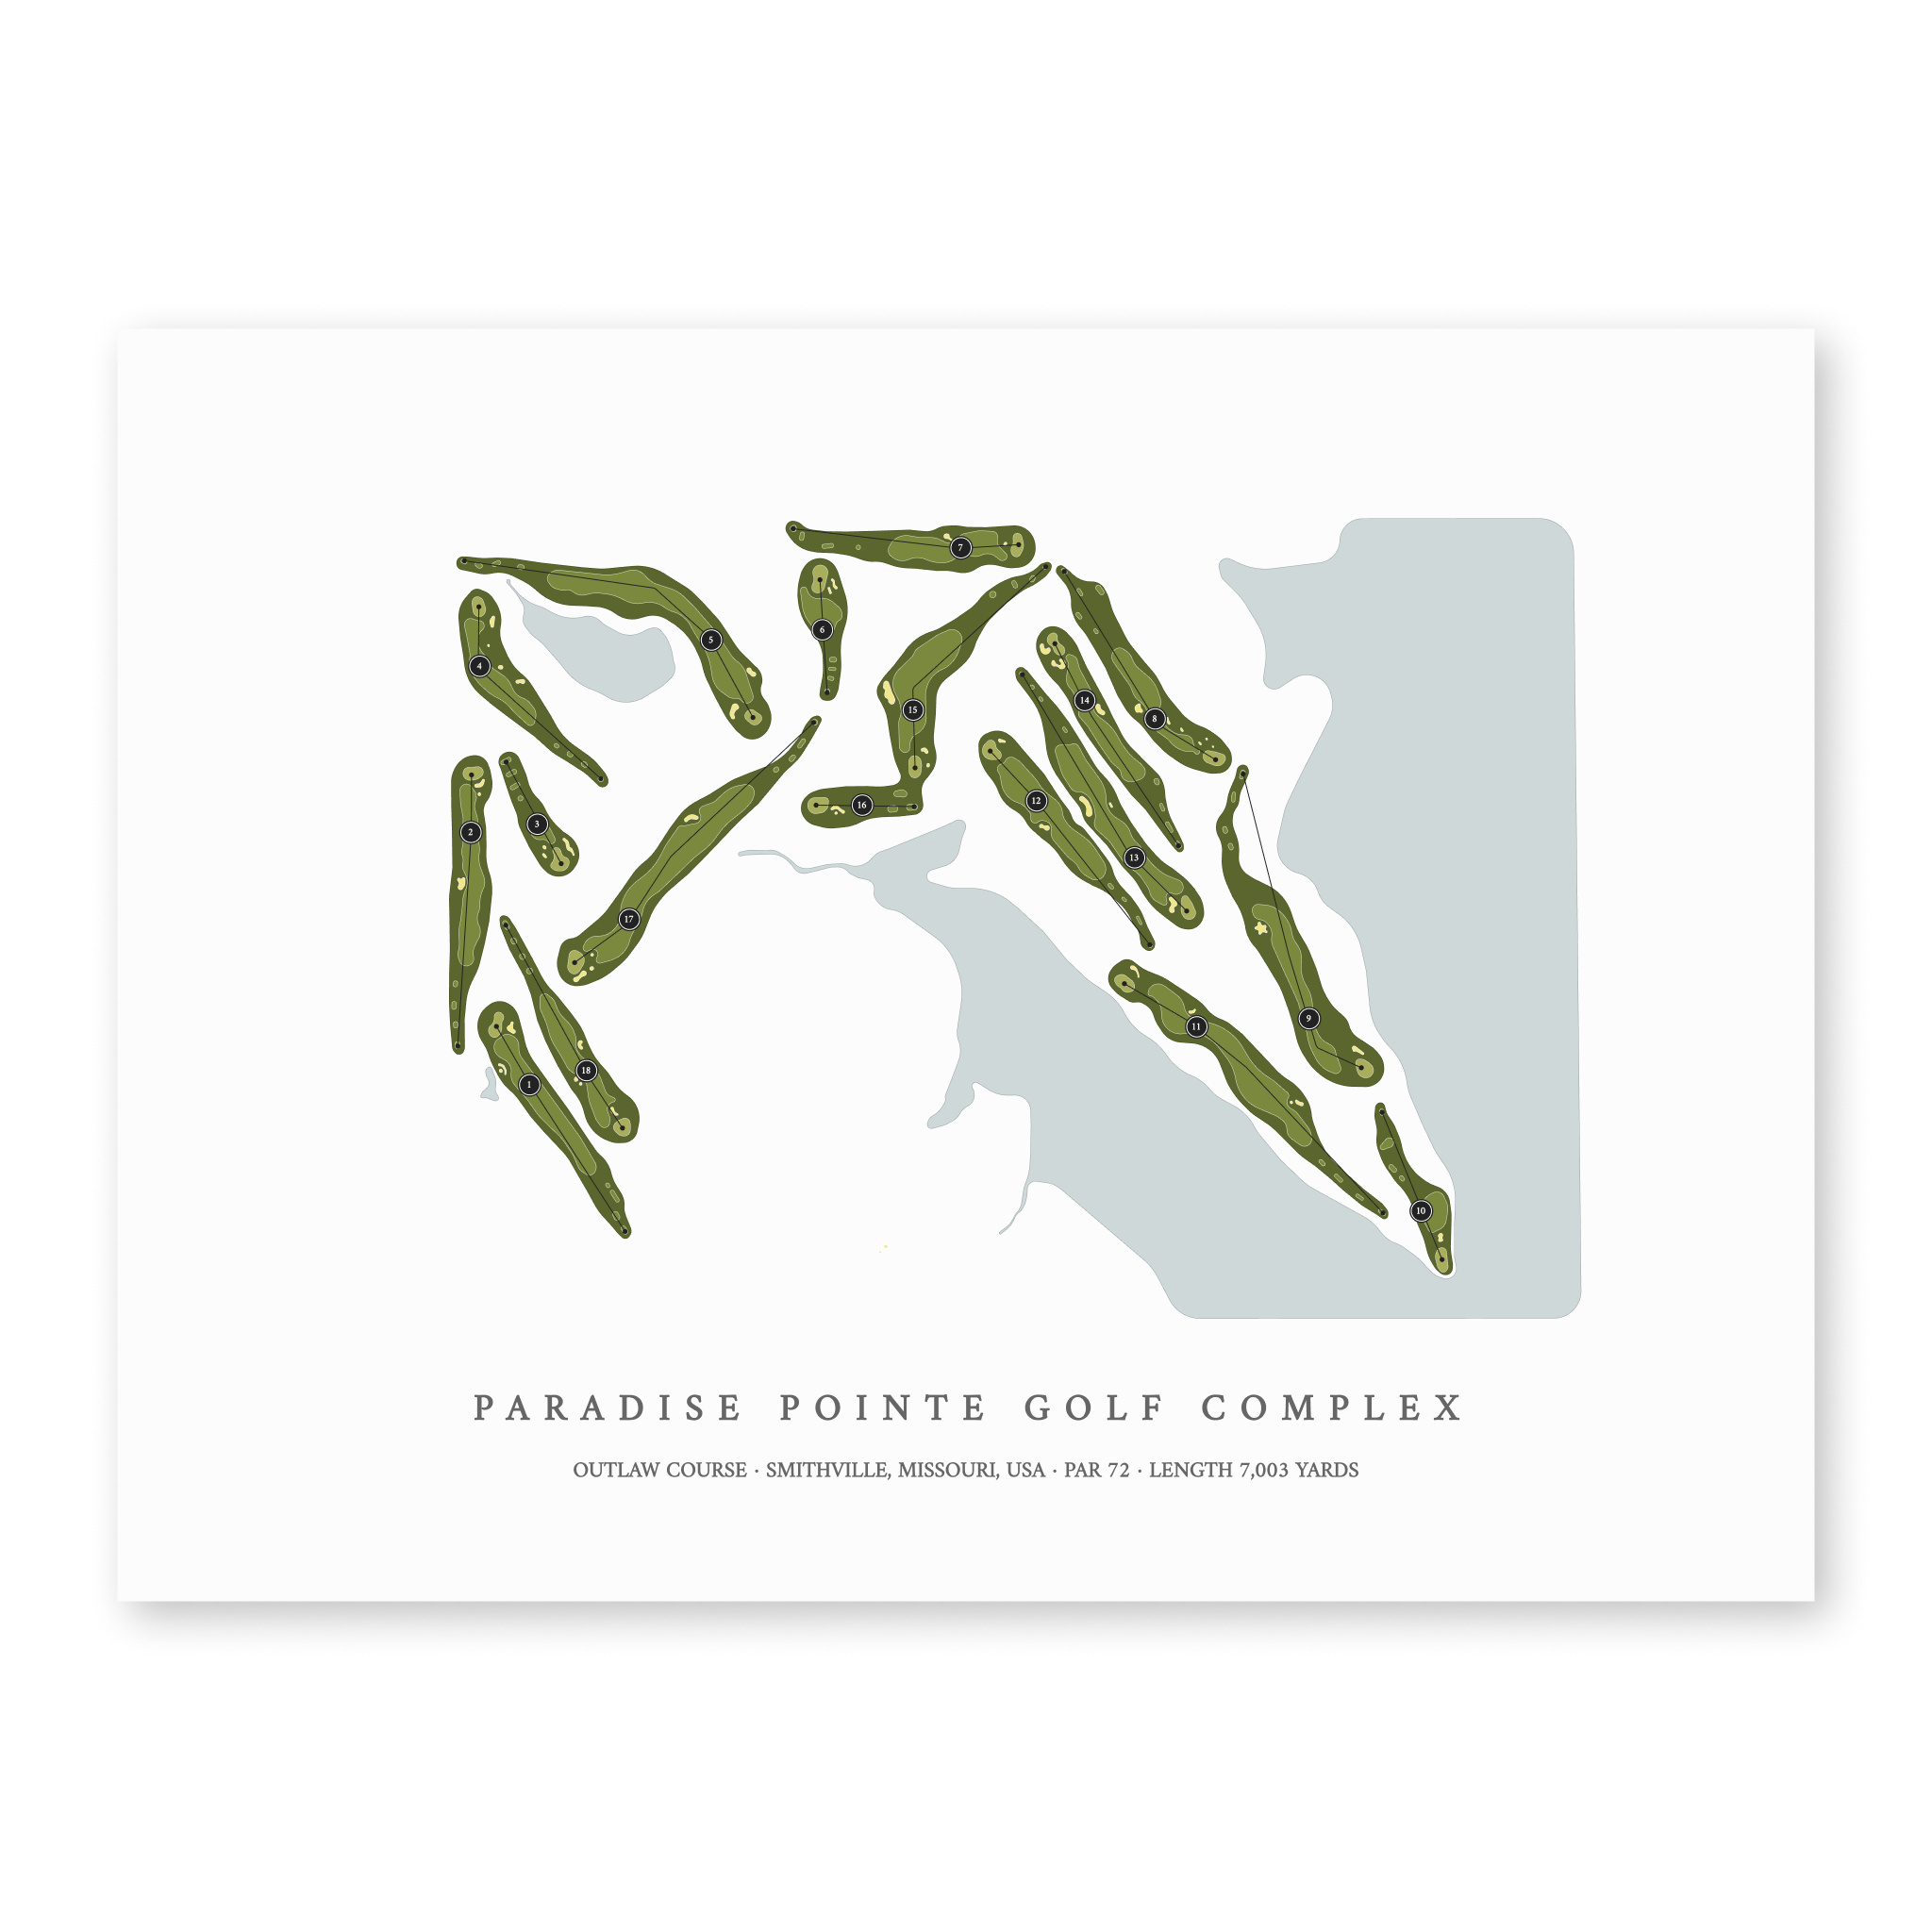 Paradise Pointe Golf Complex - Outlaw Course | Golf Course Map | Unframed